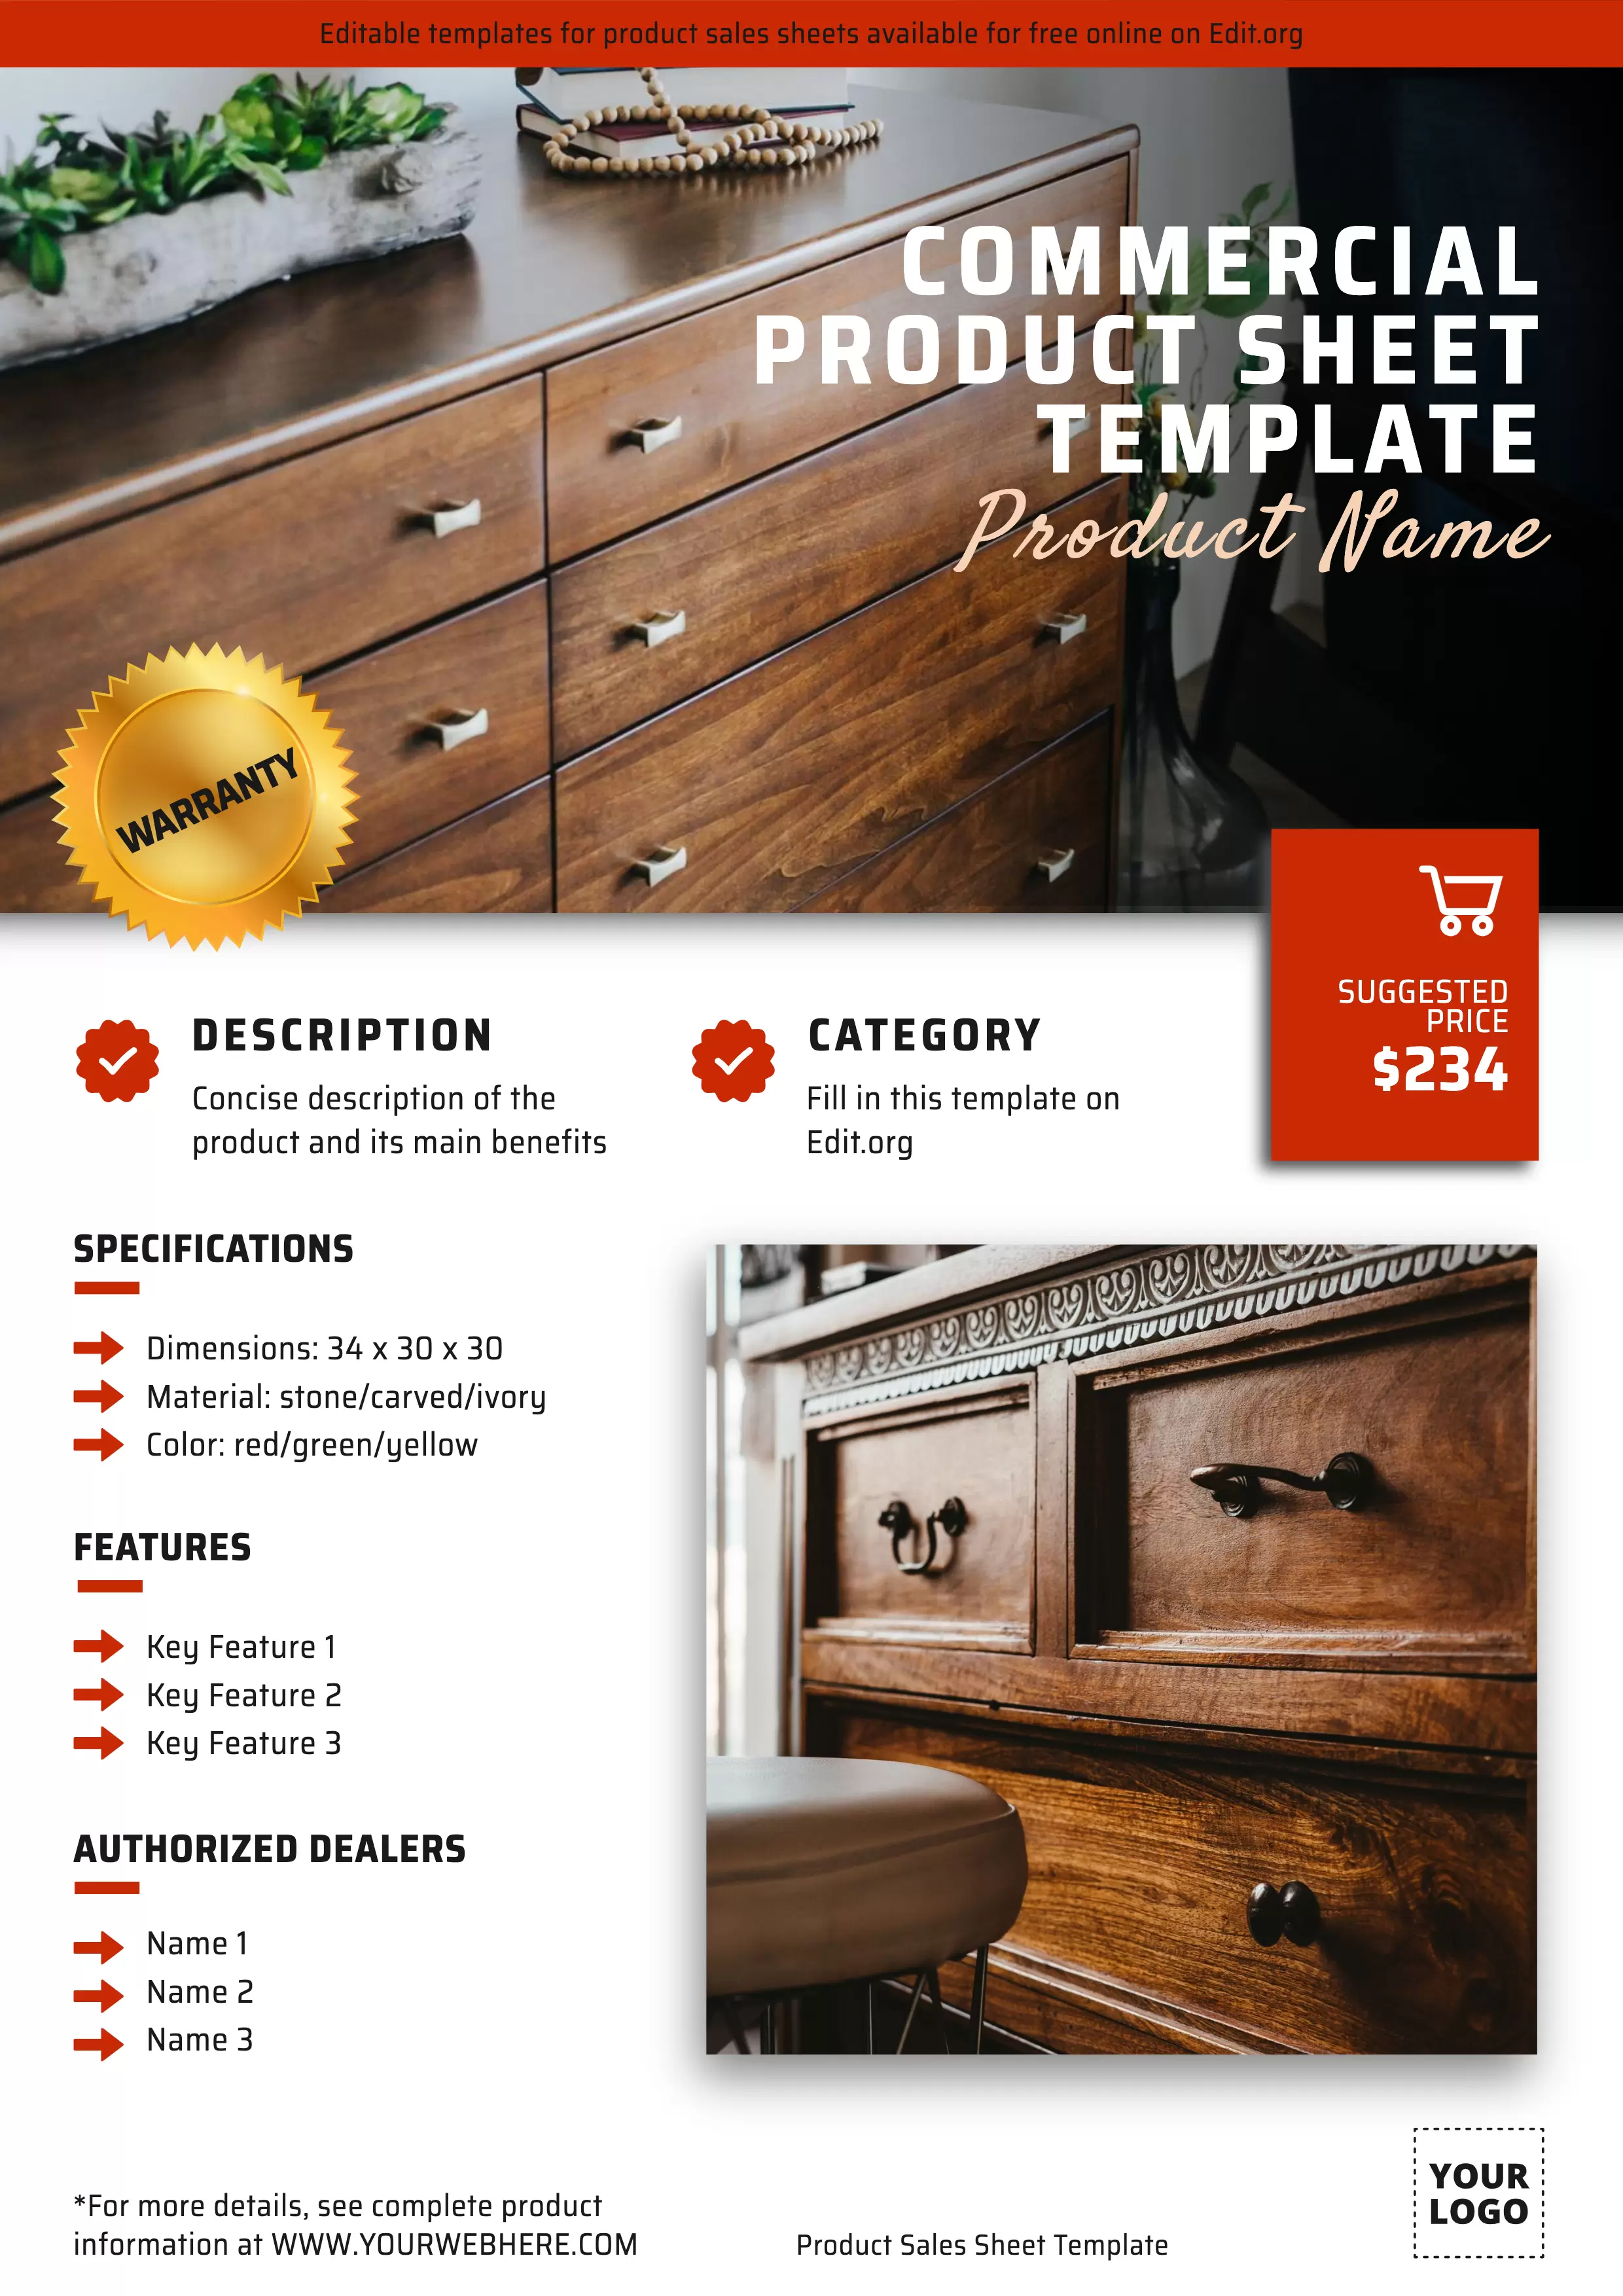 Editable sample product Sell Sheet template